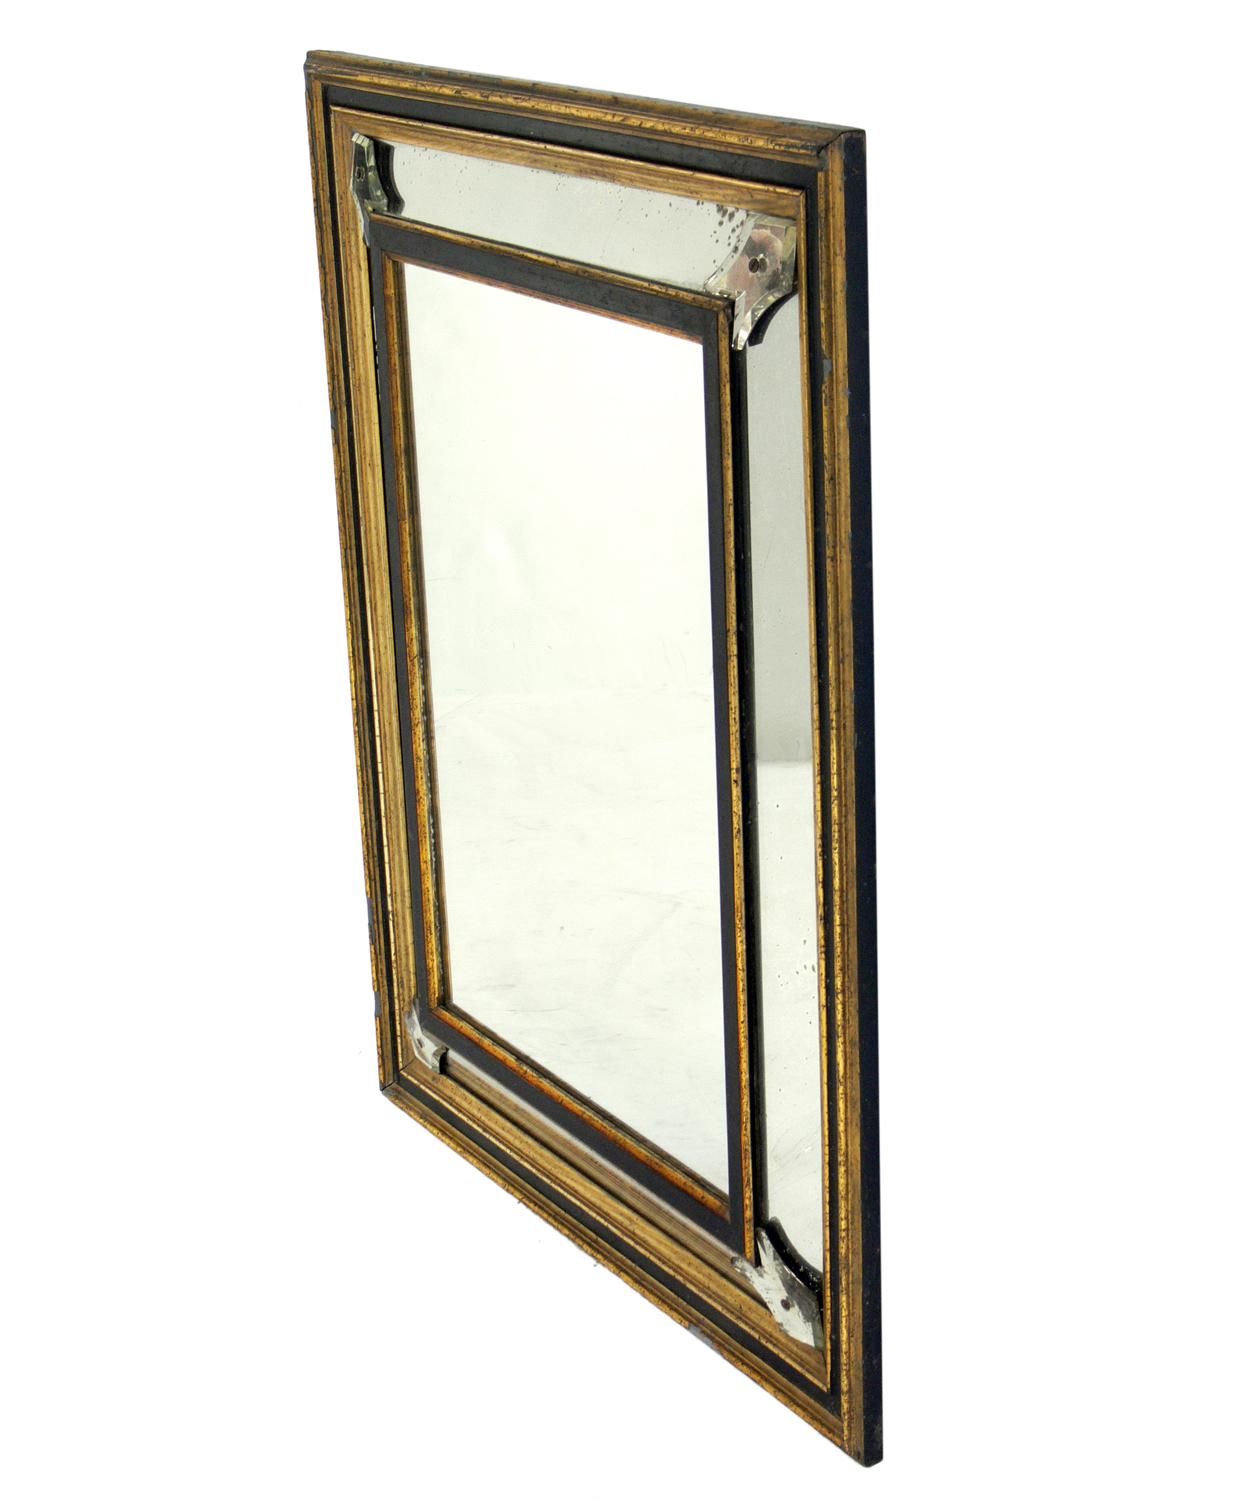 19th century black and gold gilt mirror, American, circa 1890s. Retains wonderful distressed patina and age spotting to the mirrored, black, and gilt frame. Central mirror probably replaced mid-20th century.